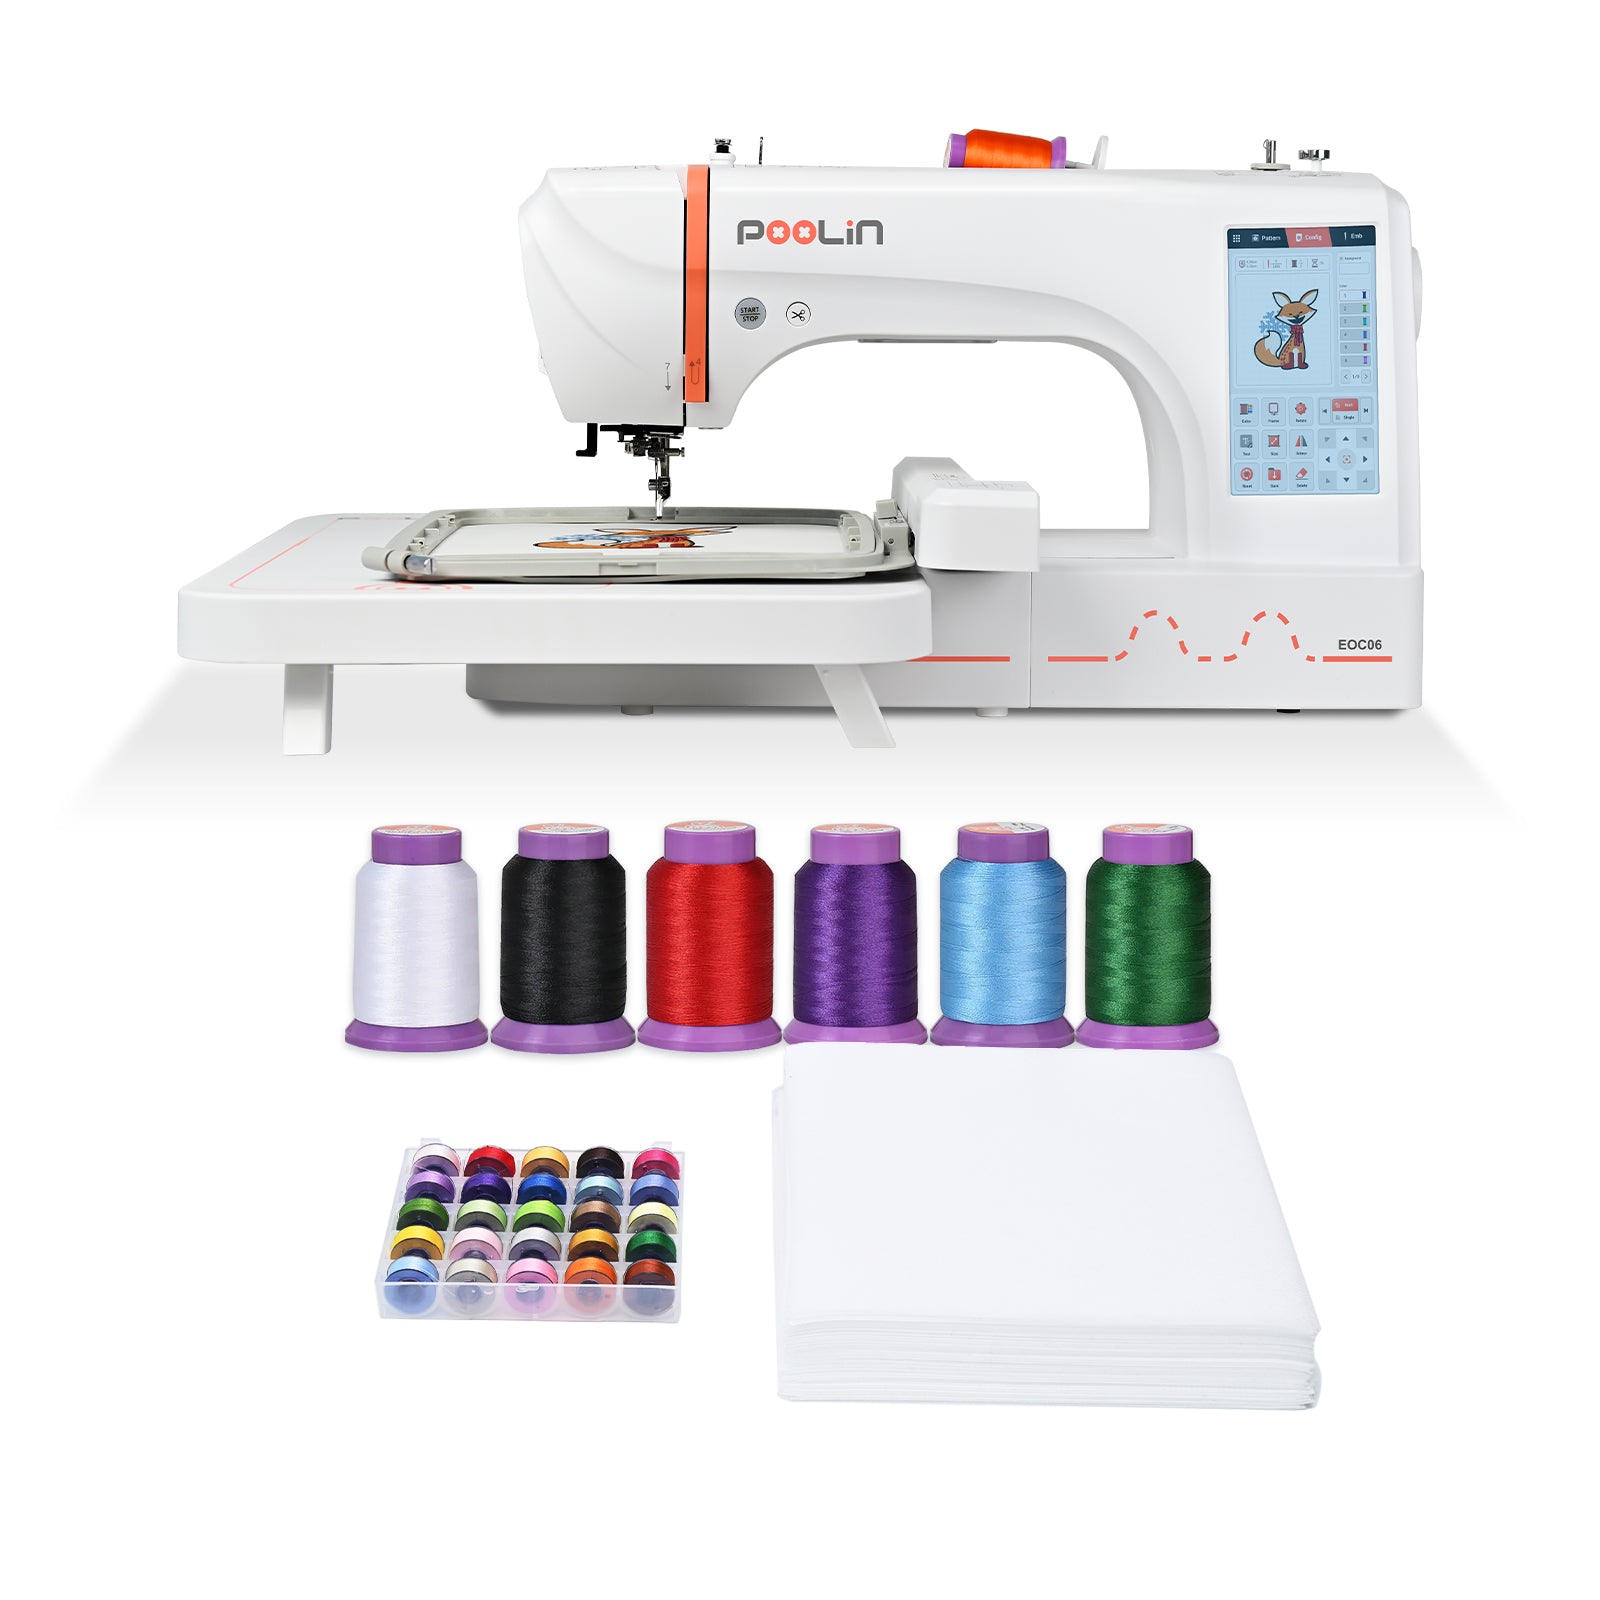 EOC06 Newest Computerized Homeuse Embroidery Machine 4-7 Days Free Shipping